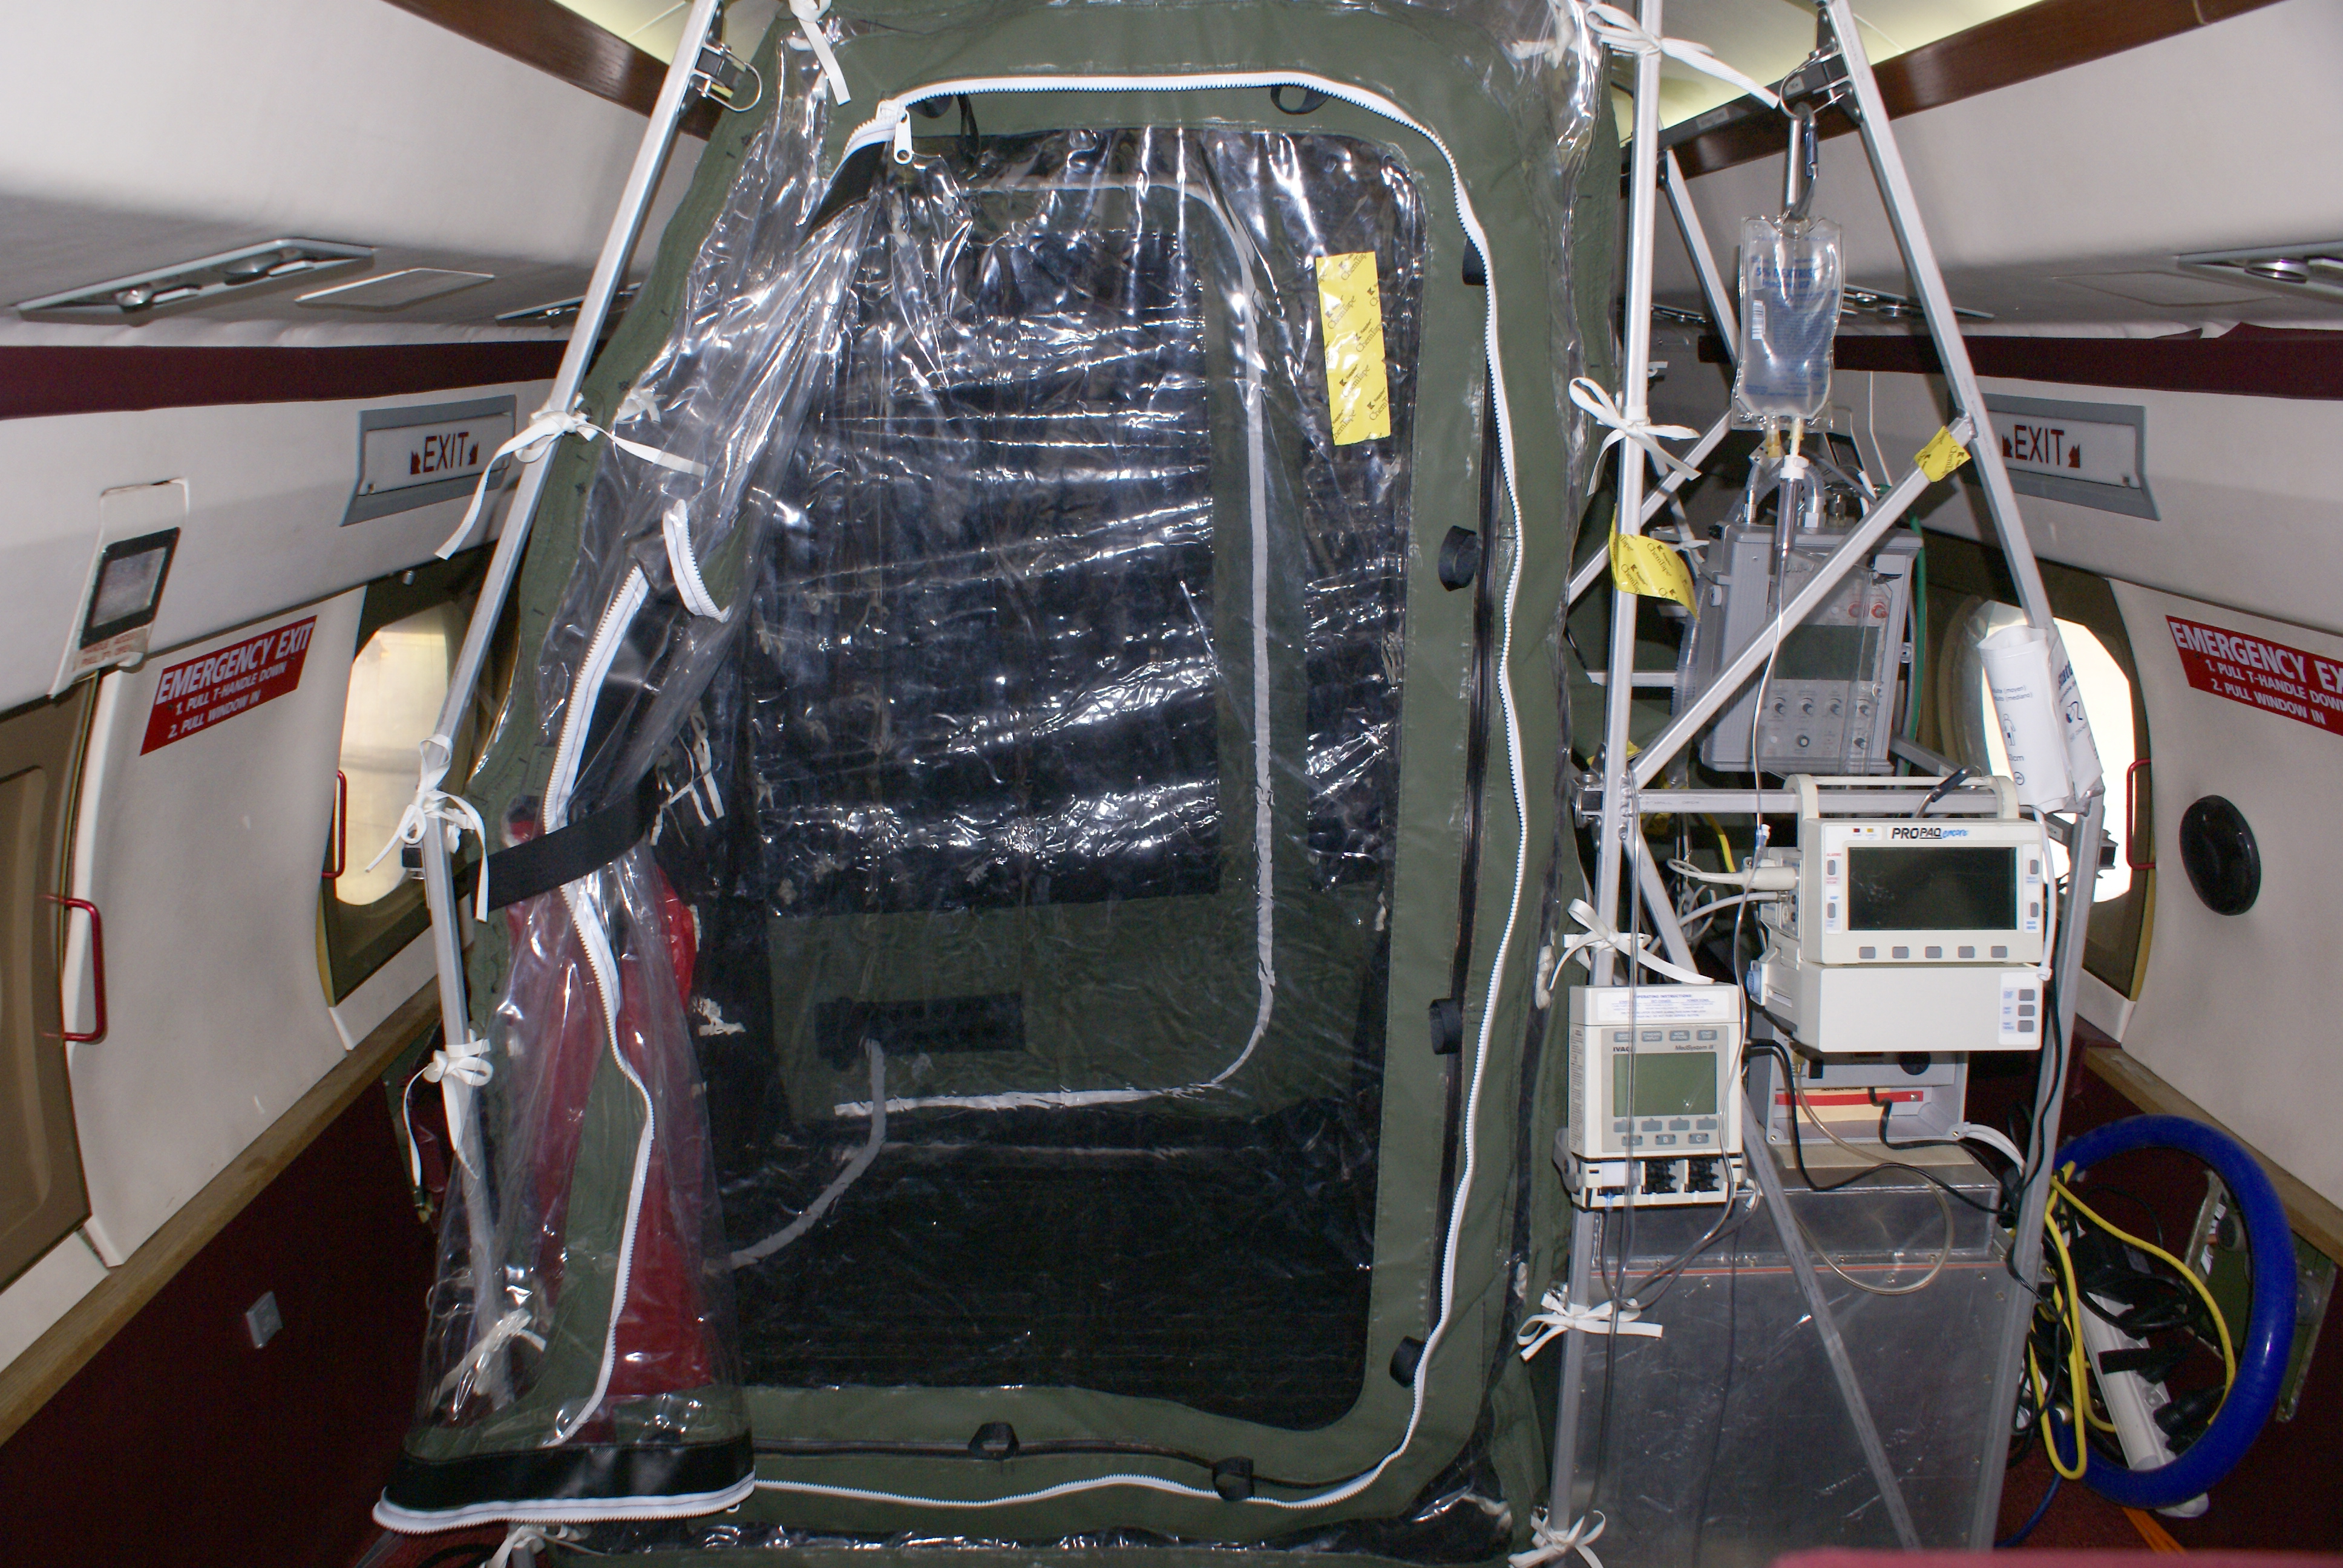 The Aeromedical Biological Containment System (ABCS), which houses the patients on their flight (photo courtesy of CDC)